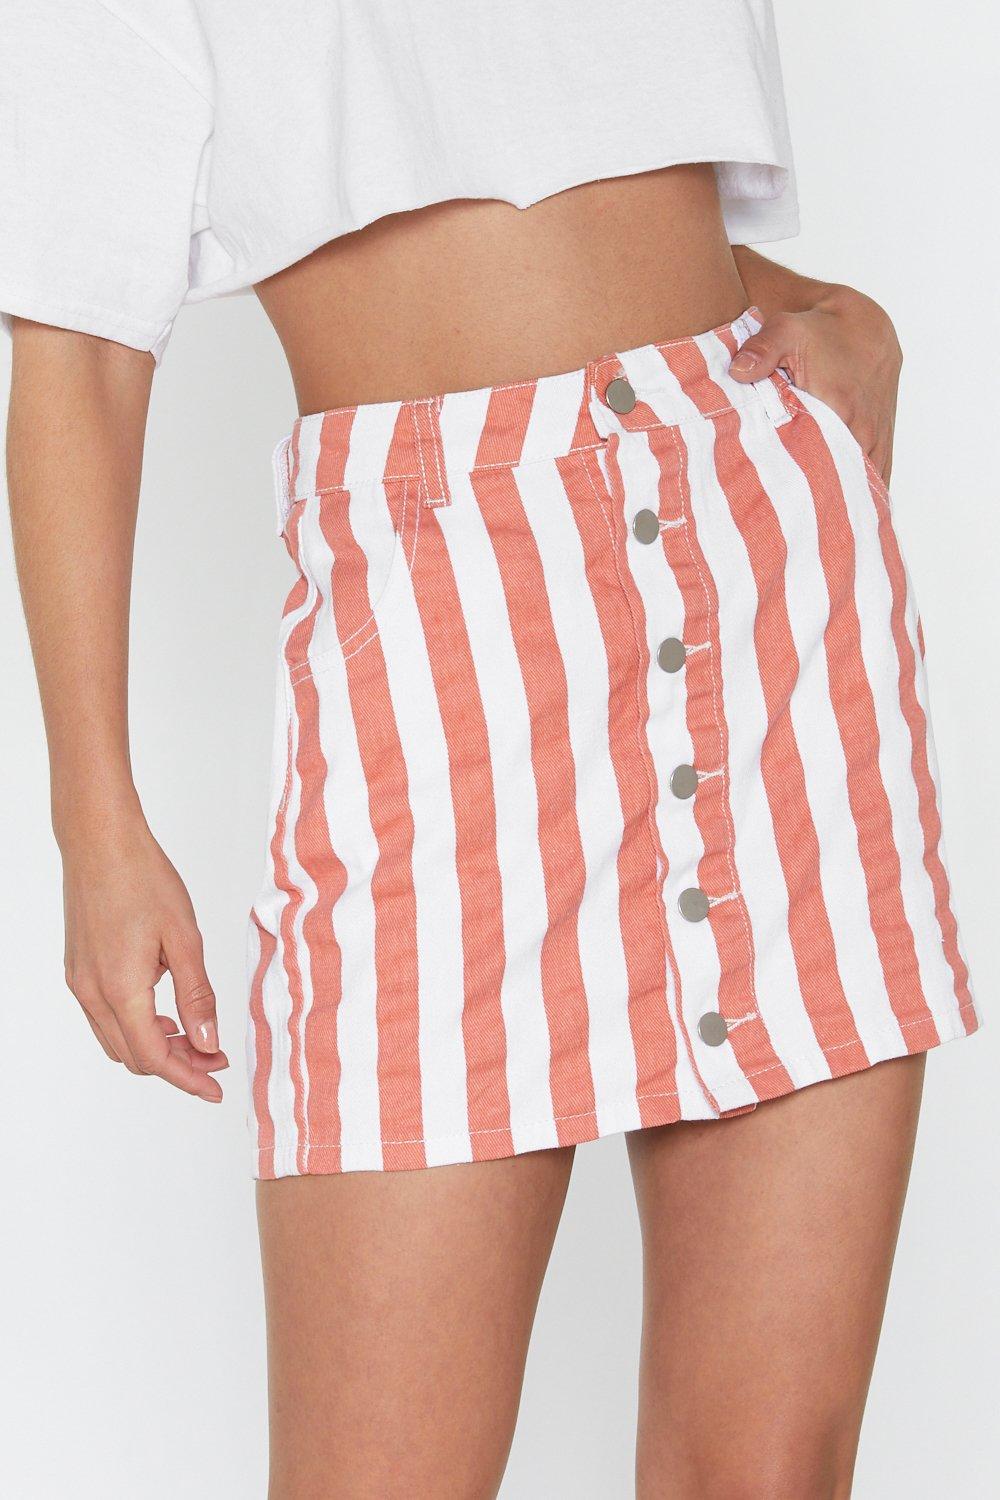 pink and white striped skirt